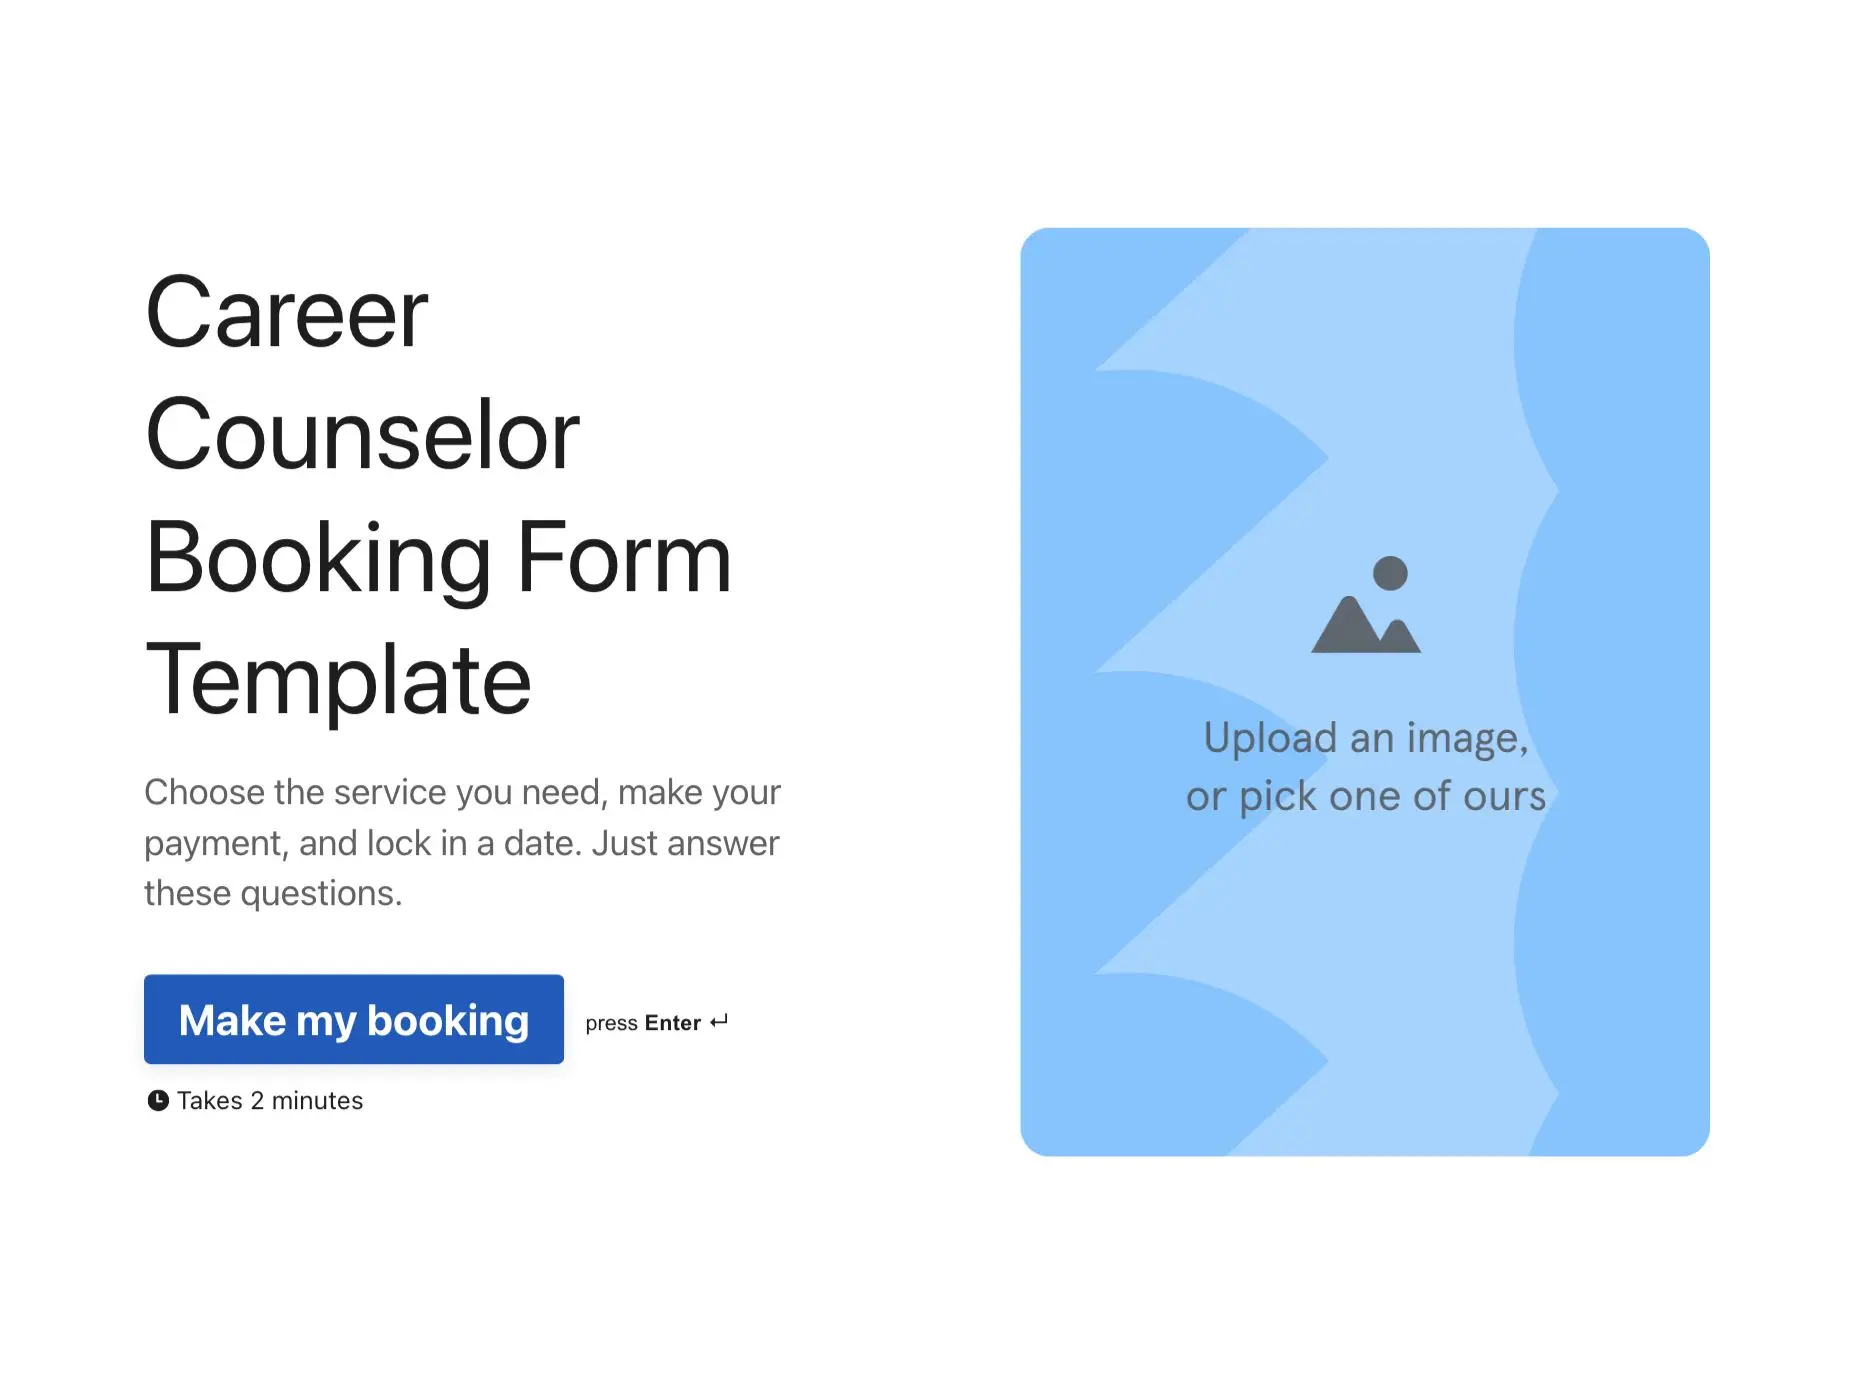 Career Counselor Booking Form Template Hero